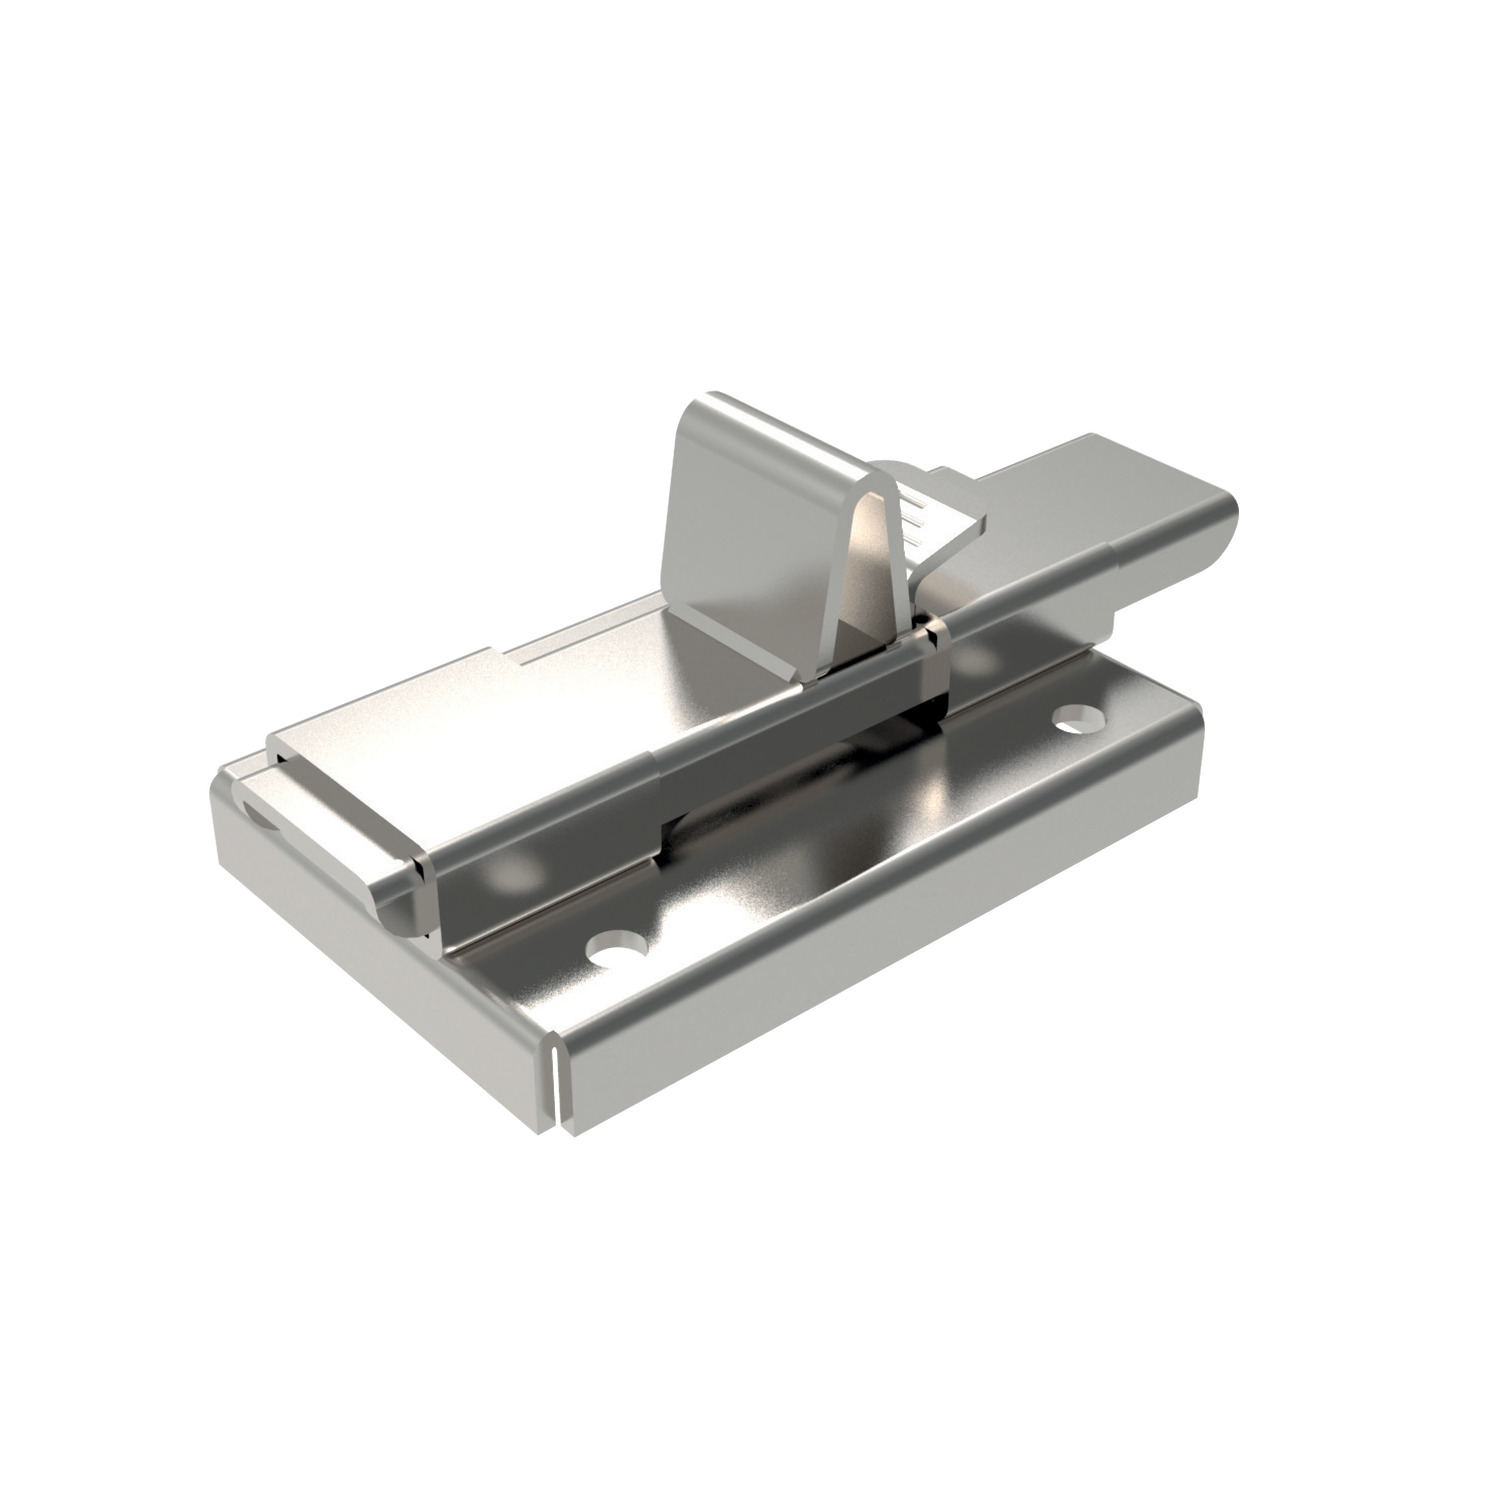 Product J6260, Slide Bar Latch stainless steel / 